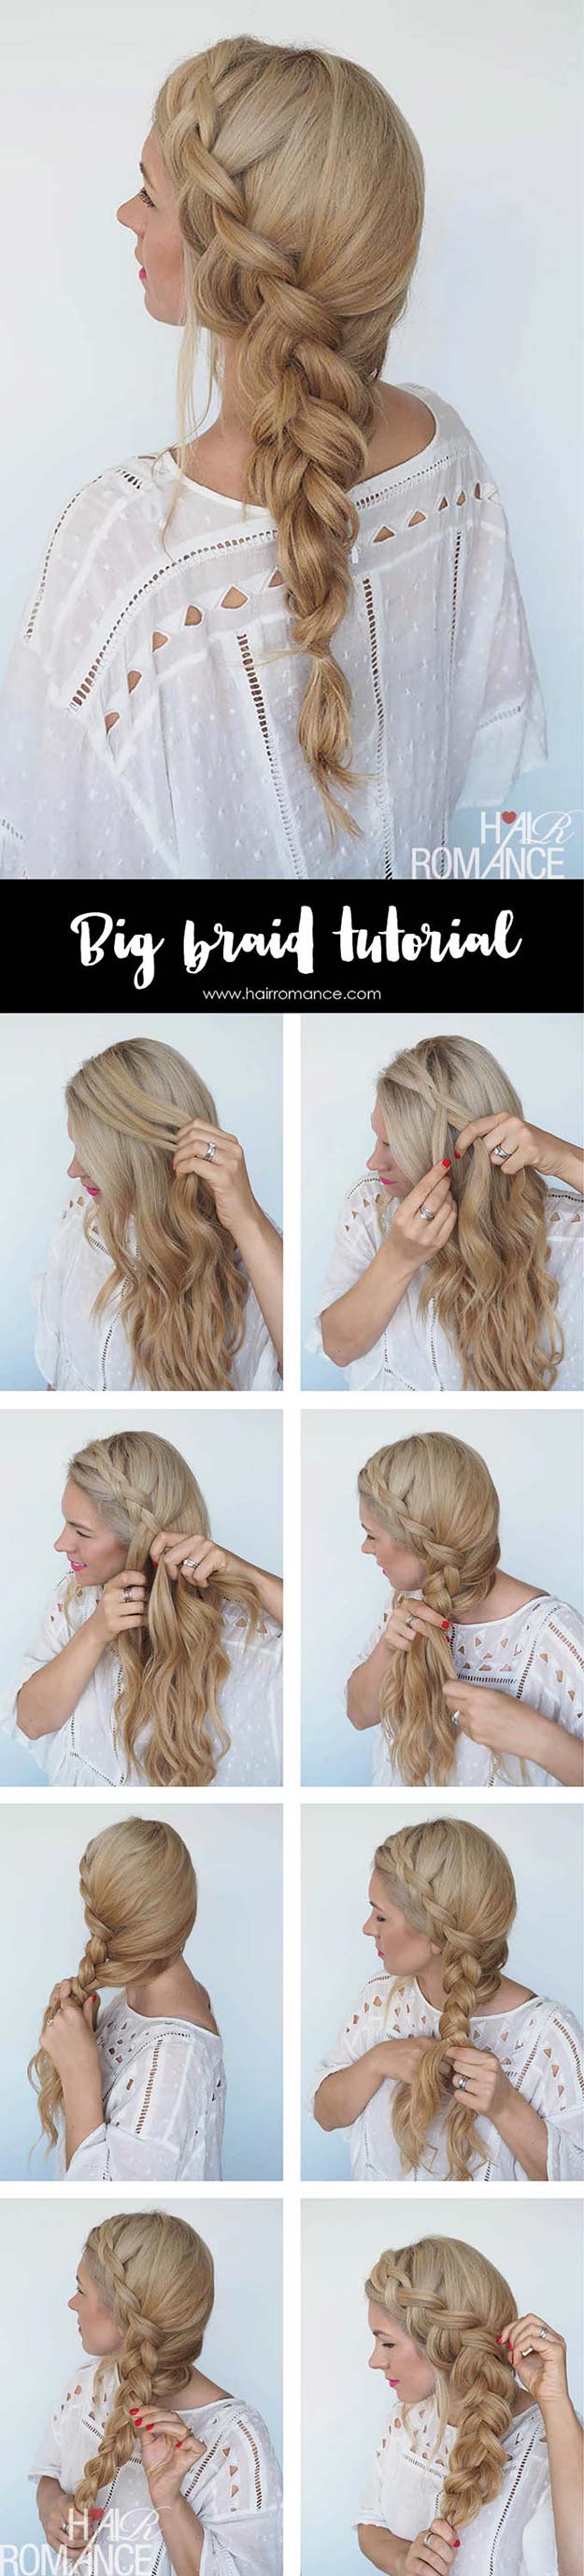 Best Hair Braiding Tutorials - Big Braid + Instant Mermaid Hair Tutorial - Easy Step by Step Tutorials for Braids - How To Braid Fishtail, French Braids, Flower Crown, Side Braids, Cornrows, Updos - Cool Braided Hairstyles for Girls, Teens and Women - School, Day and Evening, Boho, Casual and Formal Looks #hairstyles #braiding #braidingtutorials #diyhair 